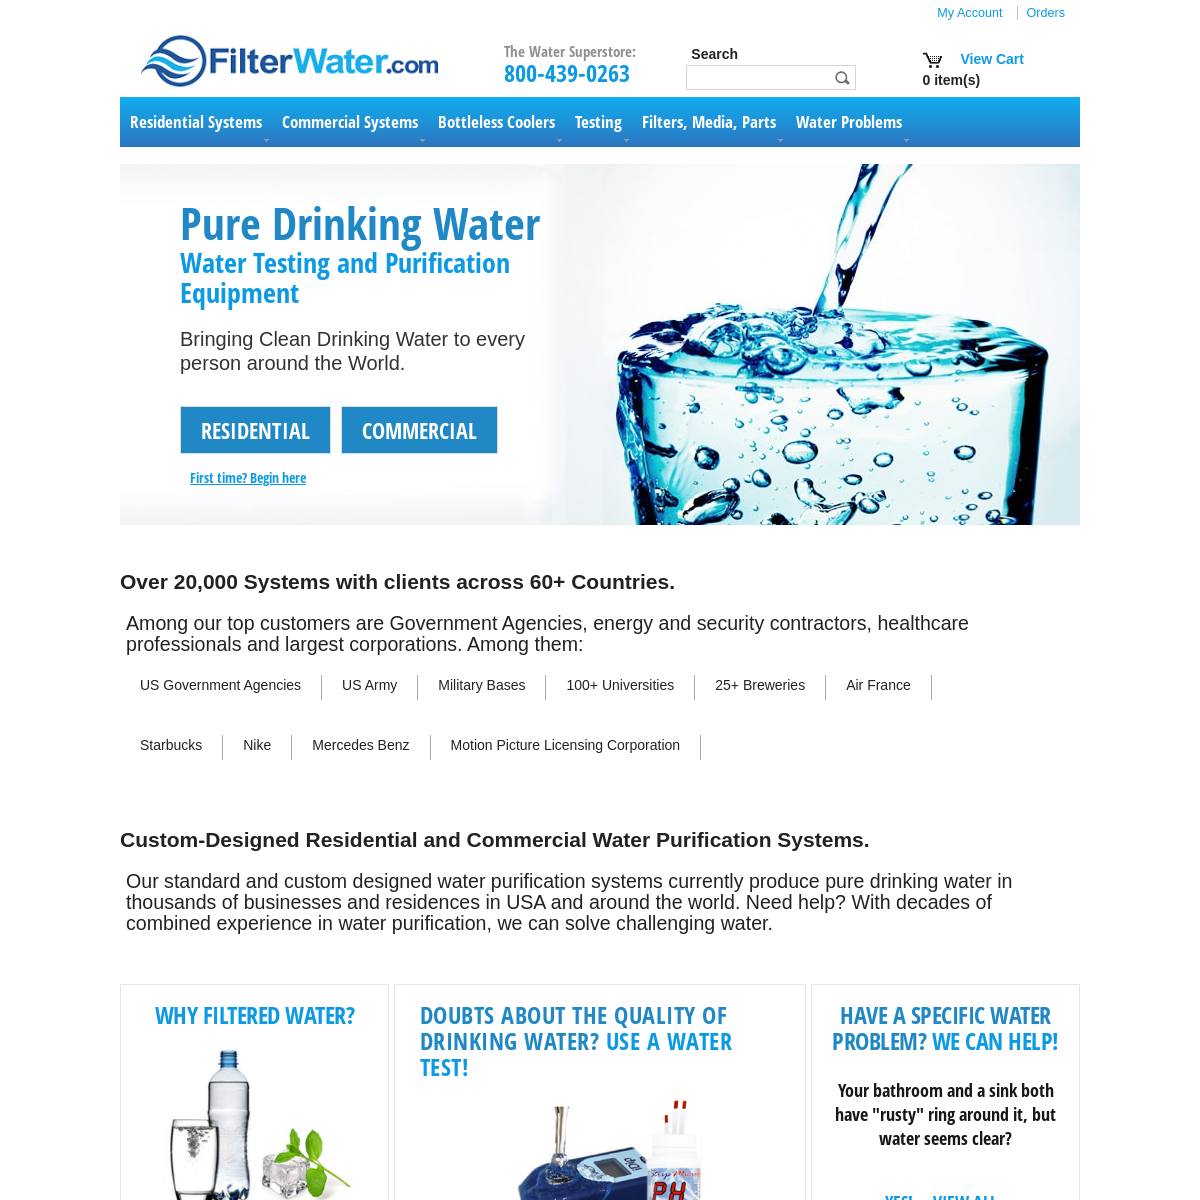 A complete backup of filterwater.com